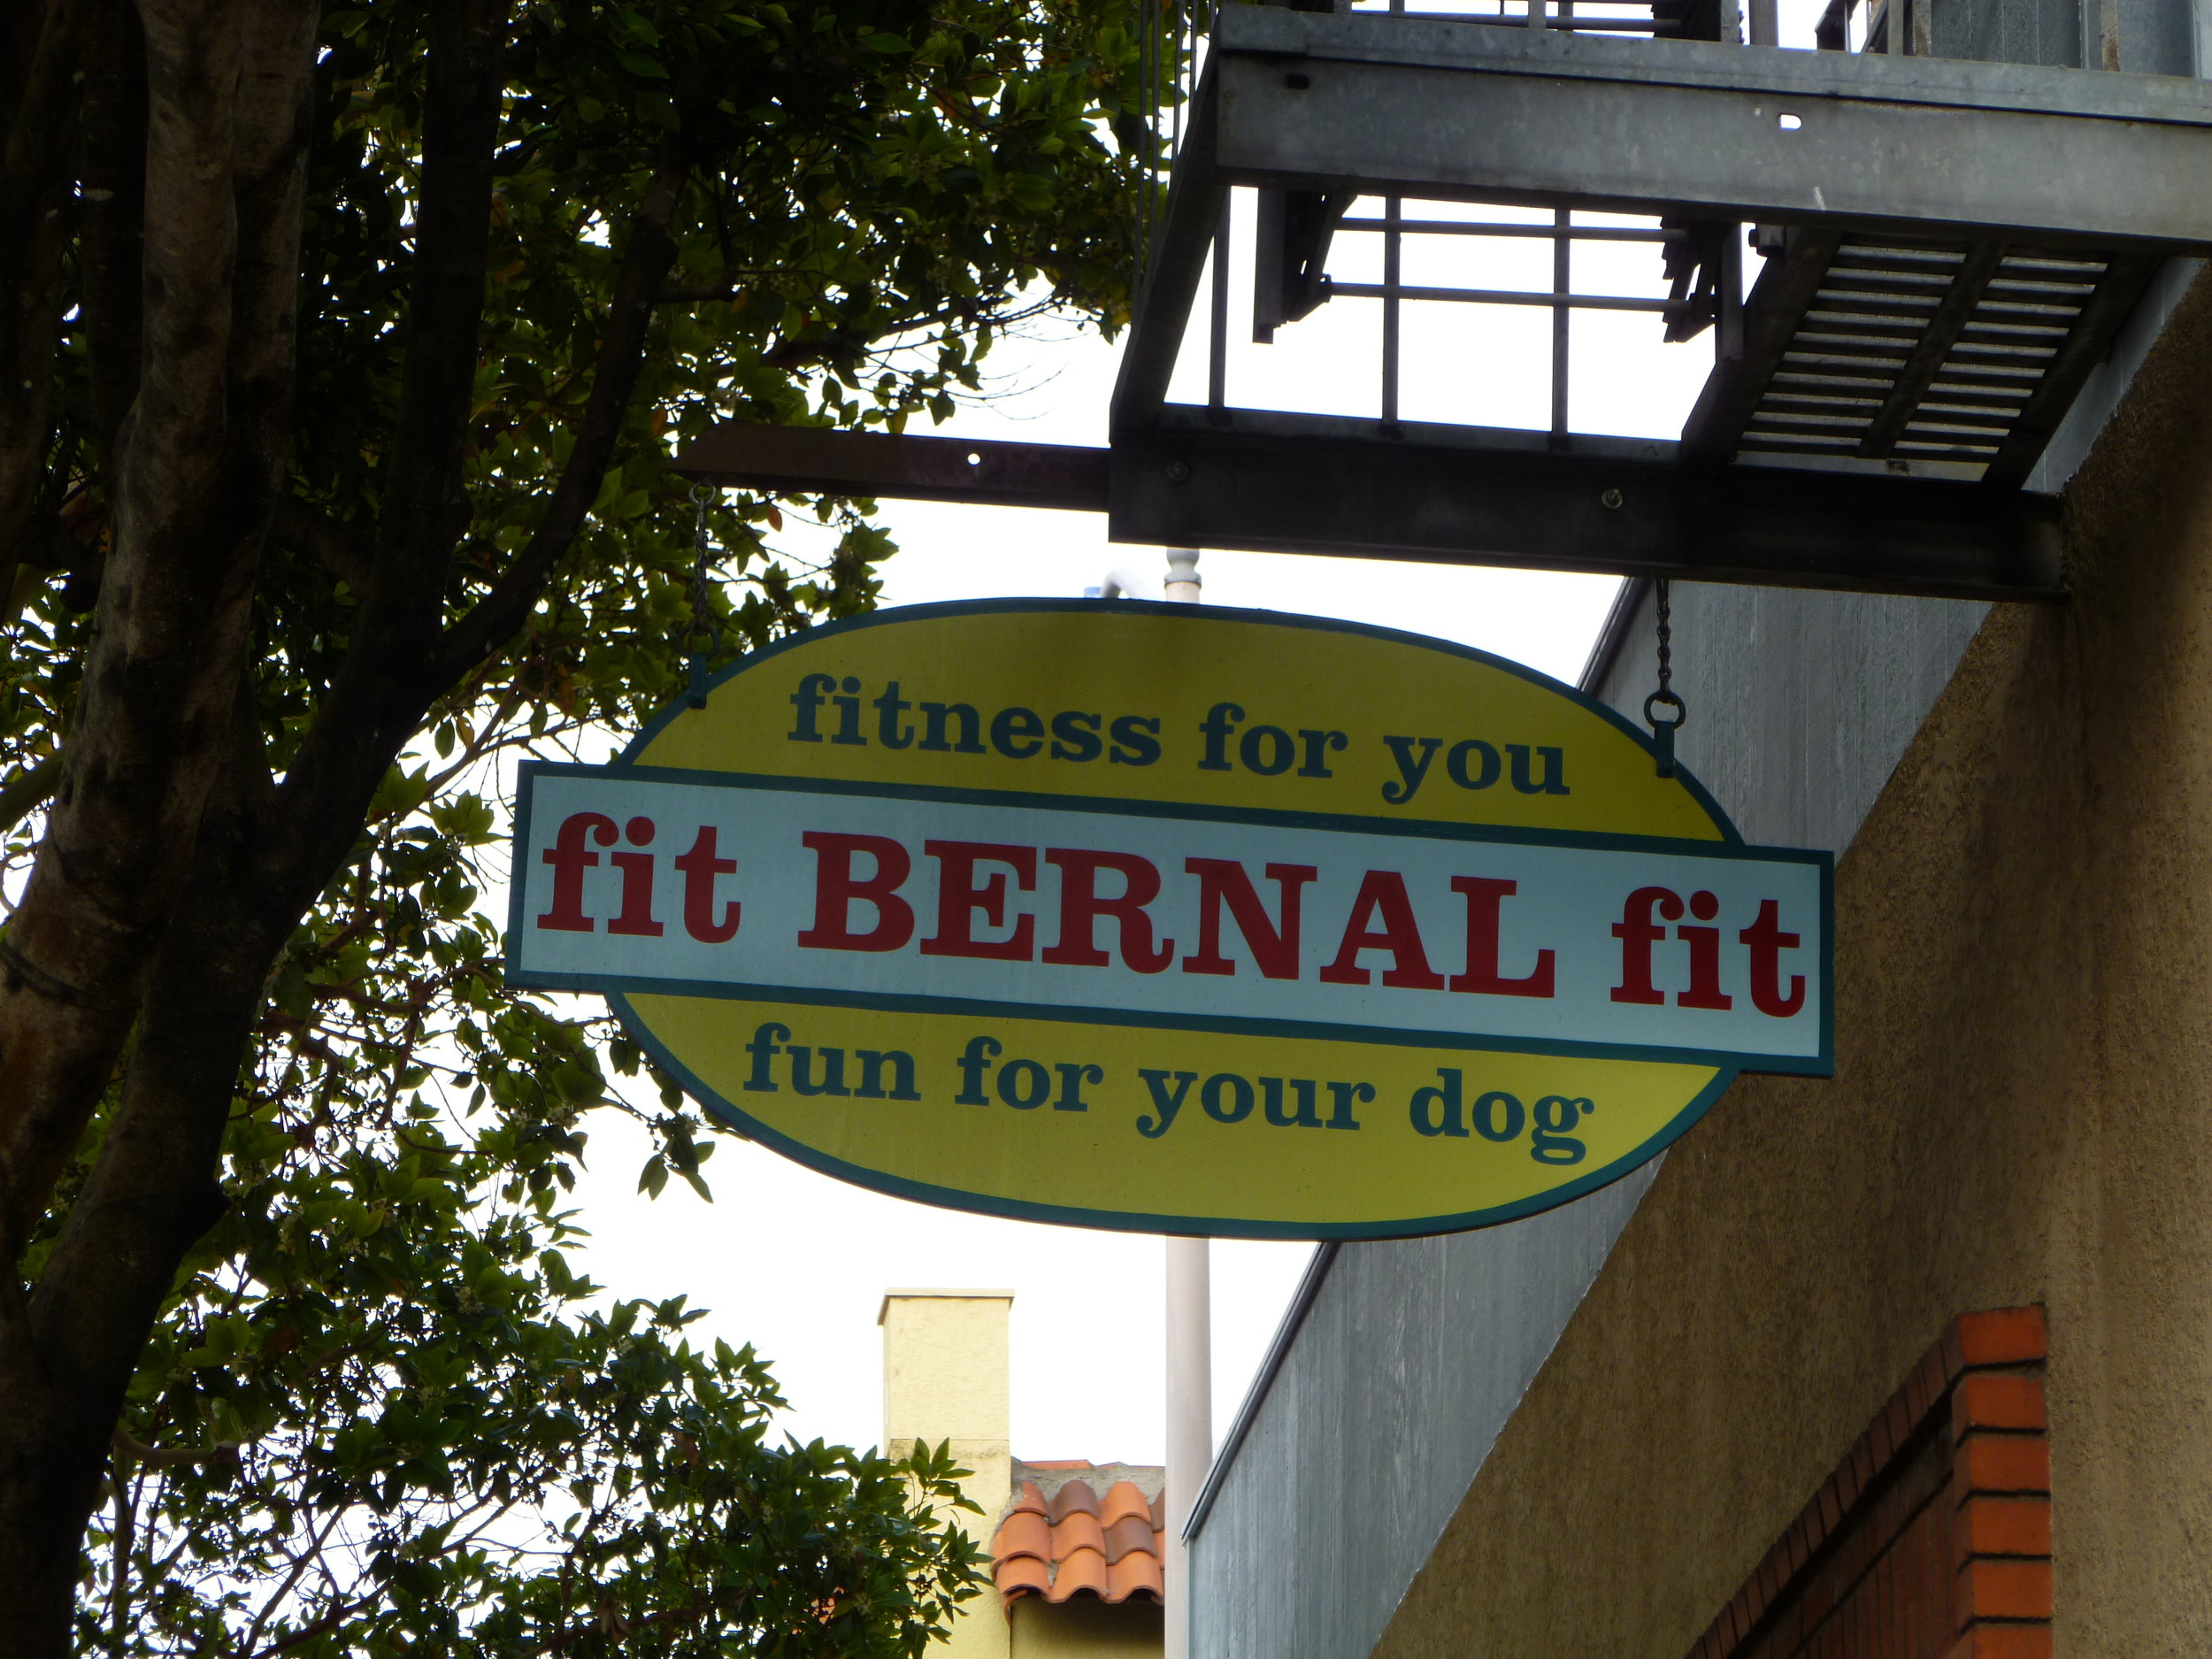 HAND-fit-bernal-fit-projecting-sign_5006177015_o.jpg